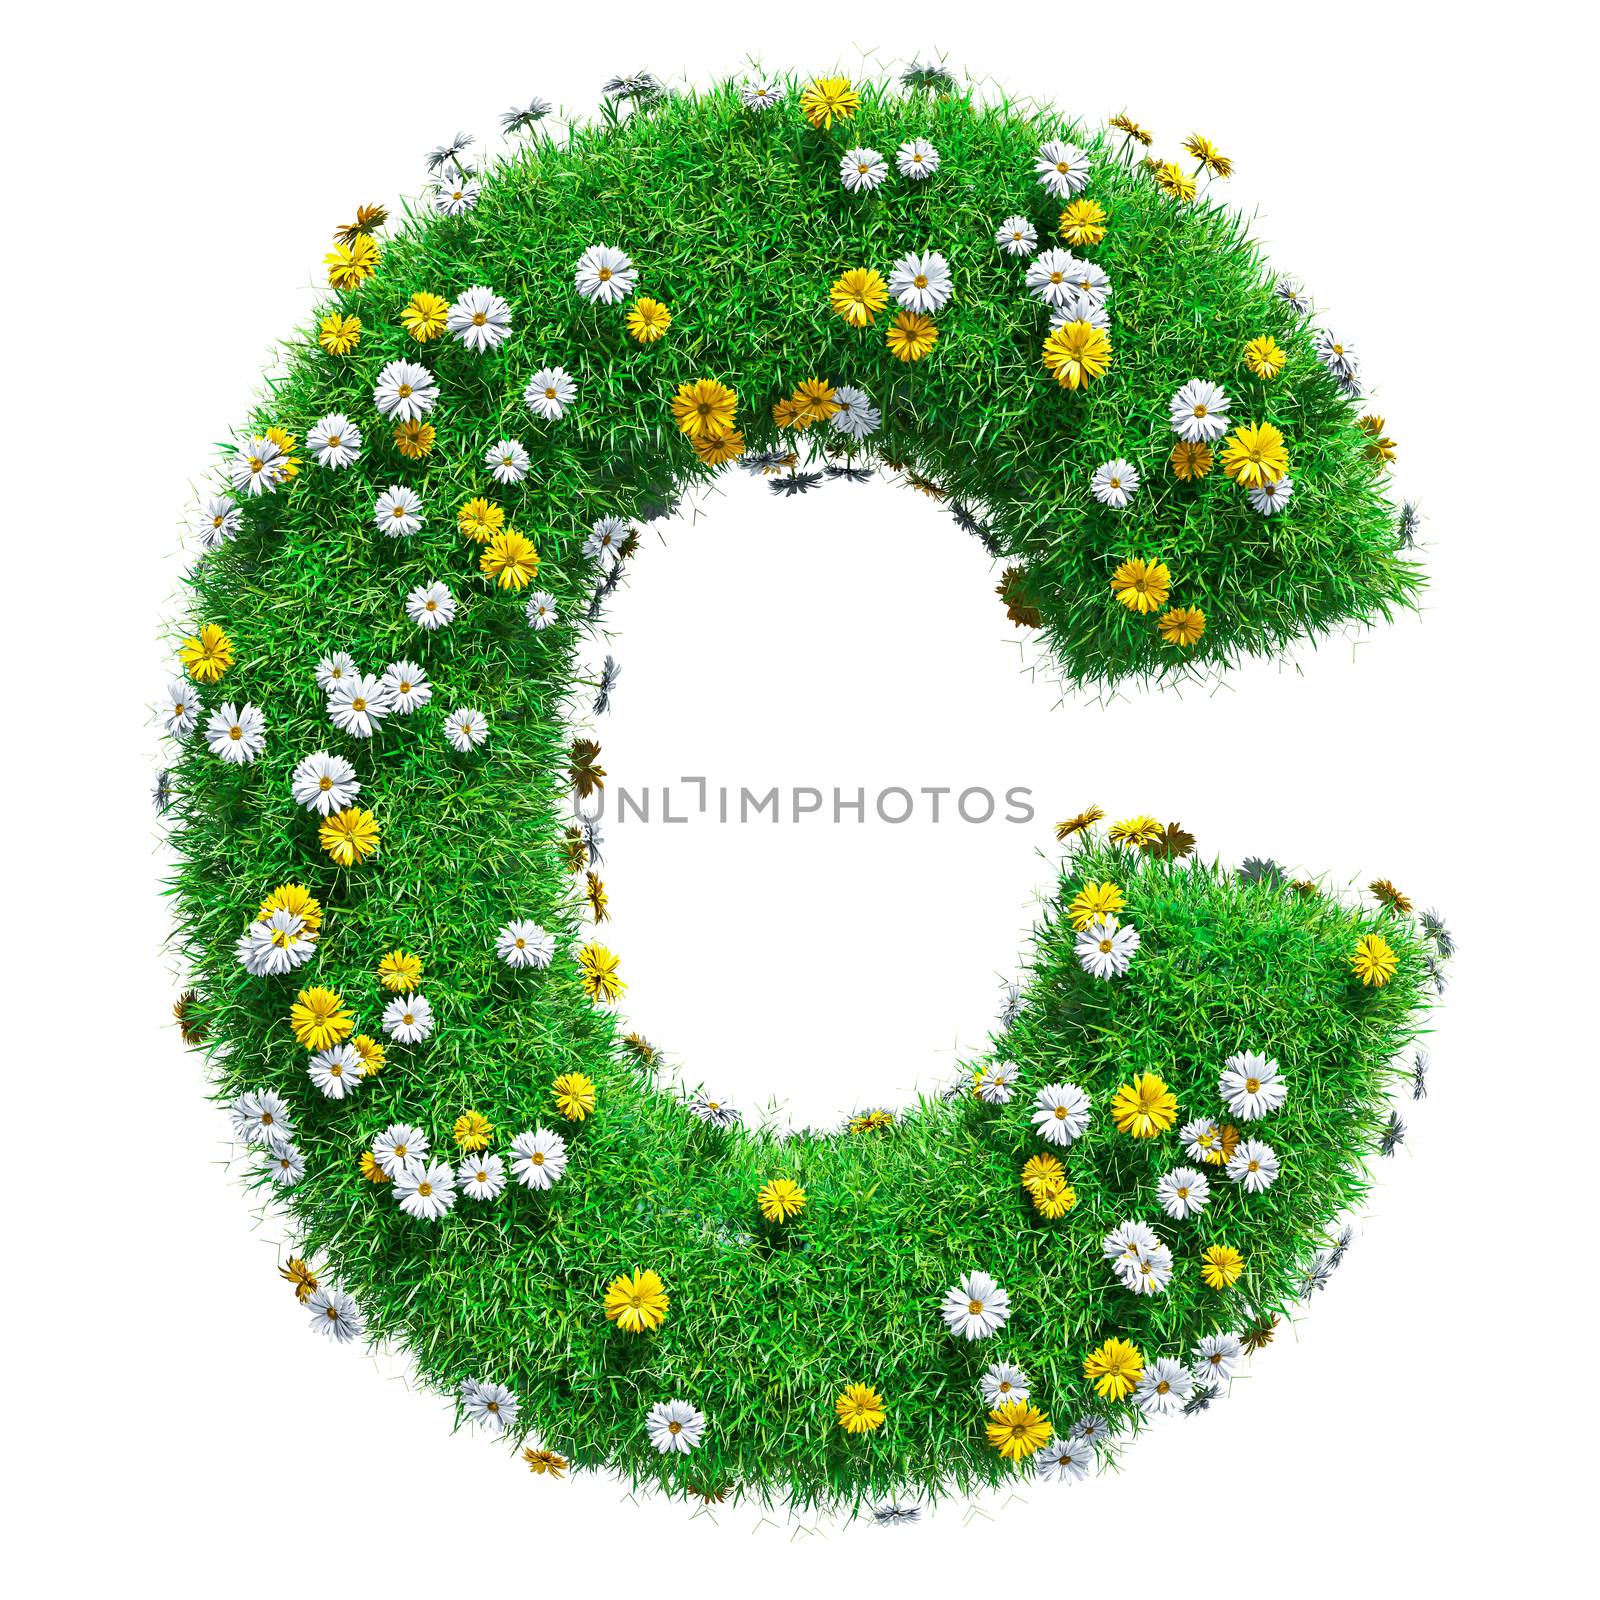 Letter C Of Green Grass And Flowers. Isolated On White Background. Font For Your Design. 3D Illustration